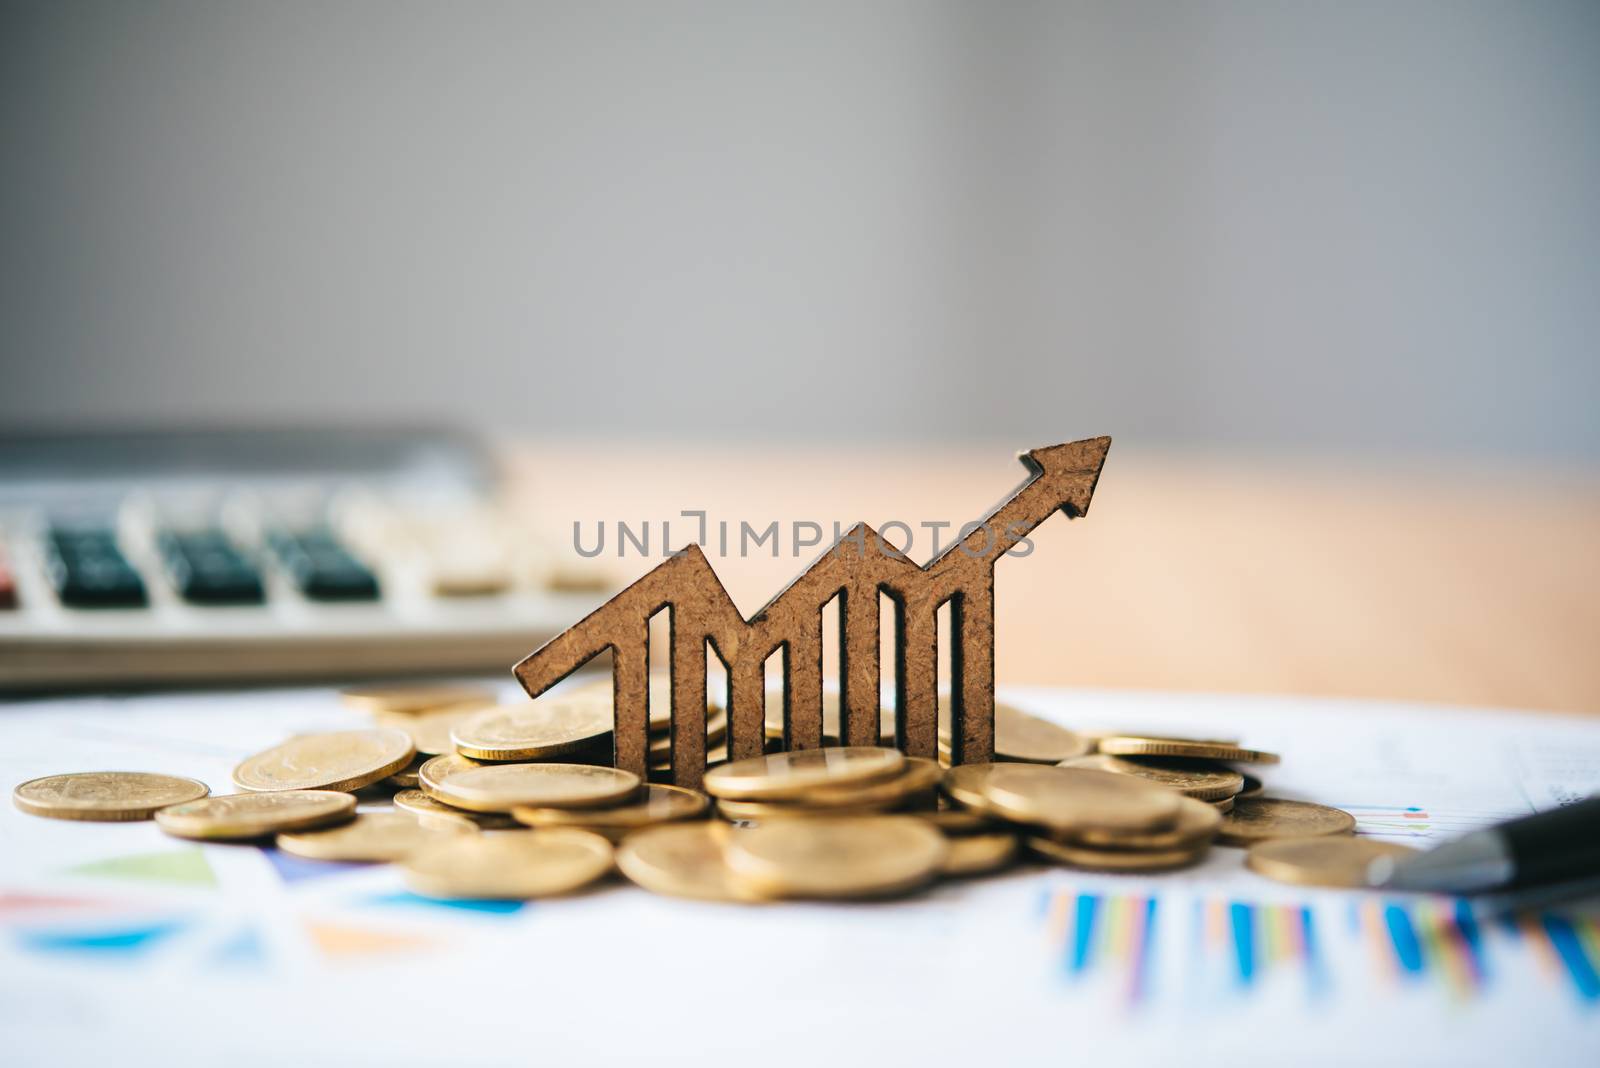 Graph icons placed on coins-Concept of business goals. by photobyphotoboy